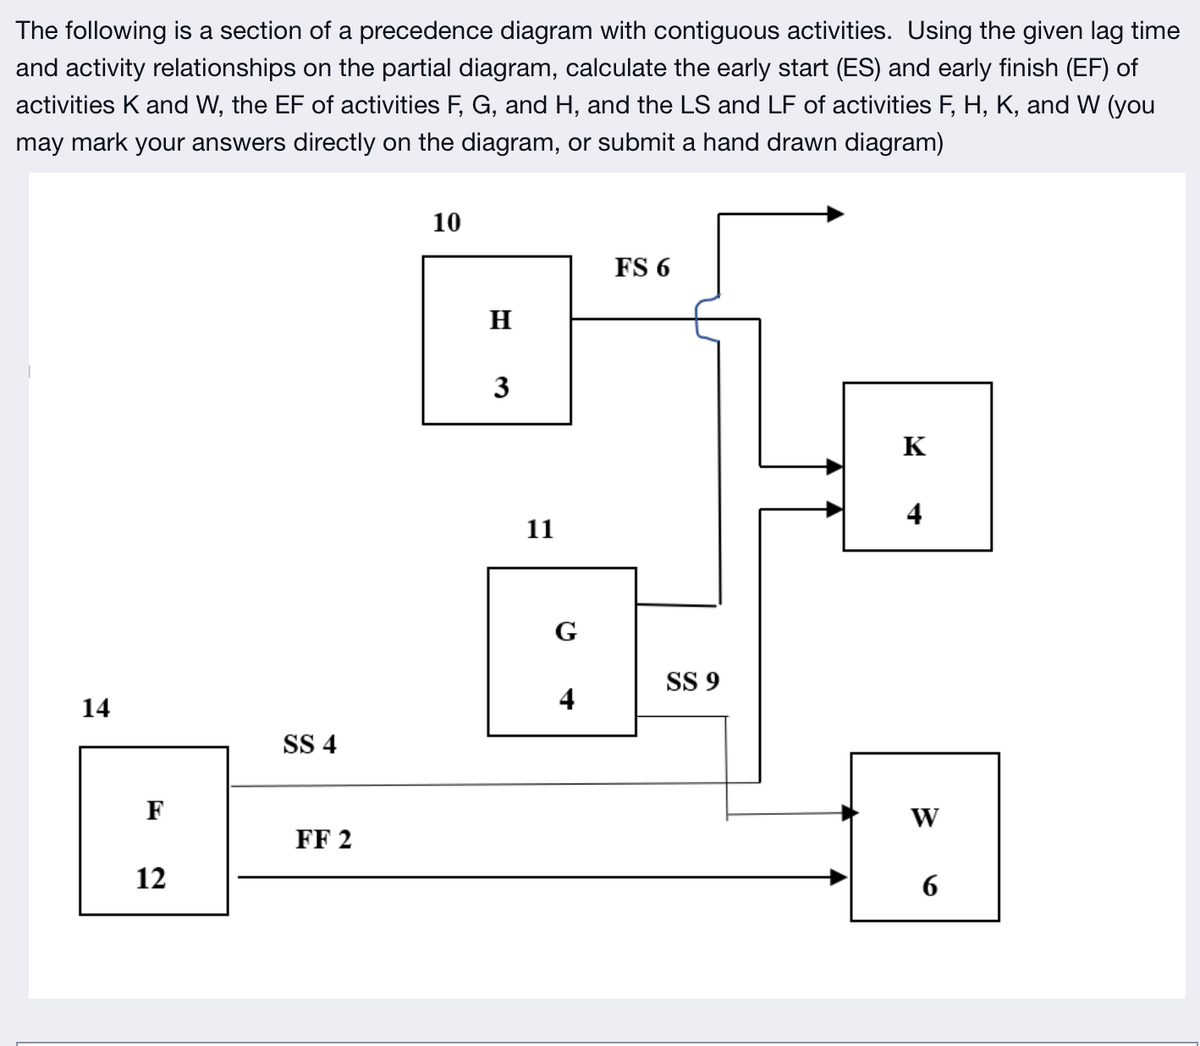 The following is a section of a precedence diagram with contiguous activities. Using the given lag time
and activity relationships on the partial diagram, calculate the early start (ES) and early finish (EF) of
activities K and W, the EF of activities F, G, and H, and the LS and LF of activities F, H, K, and W (you
may mark your answers directly on the diagram, or submit a hand drawn diagram)
14
F
12
SS 4
FF 2
10
H
3
11
G
4
FS 6
SS 9
K
W
6